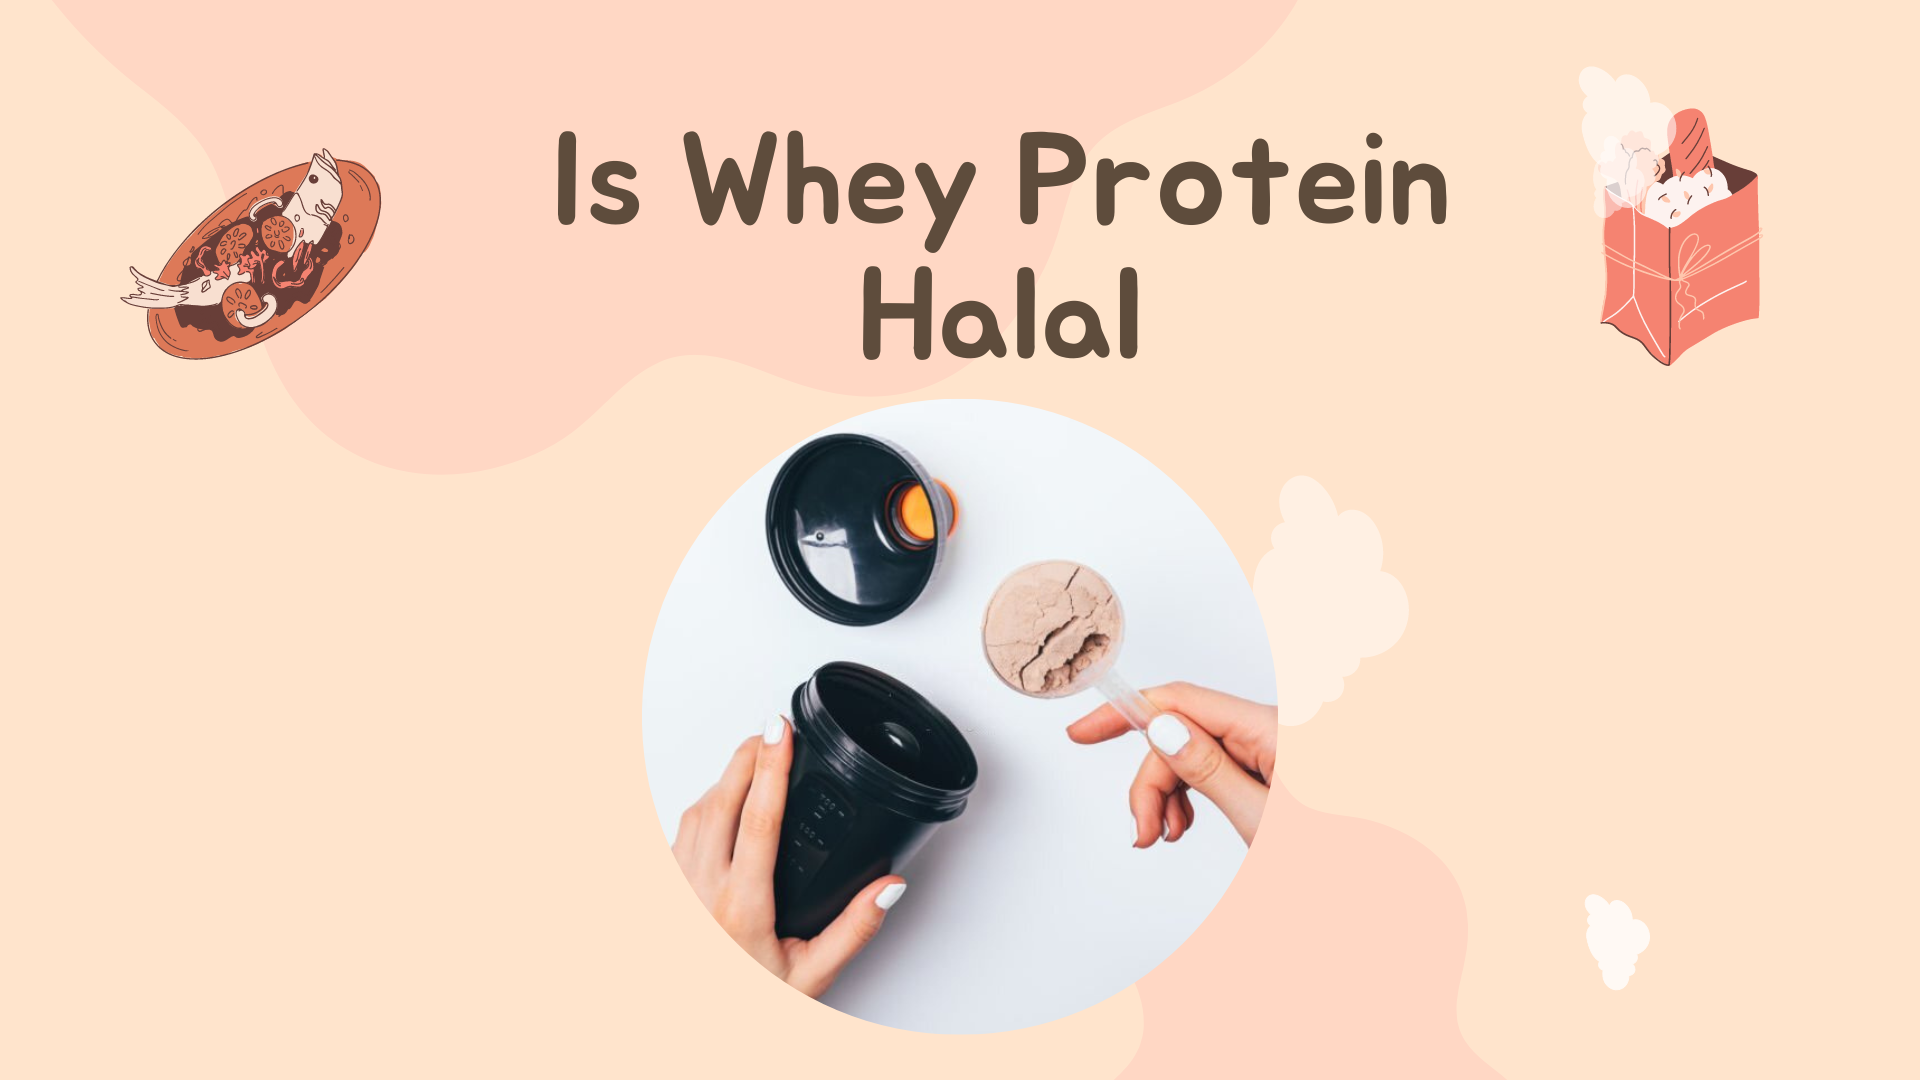 is whey protein halal